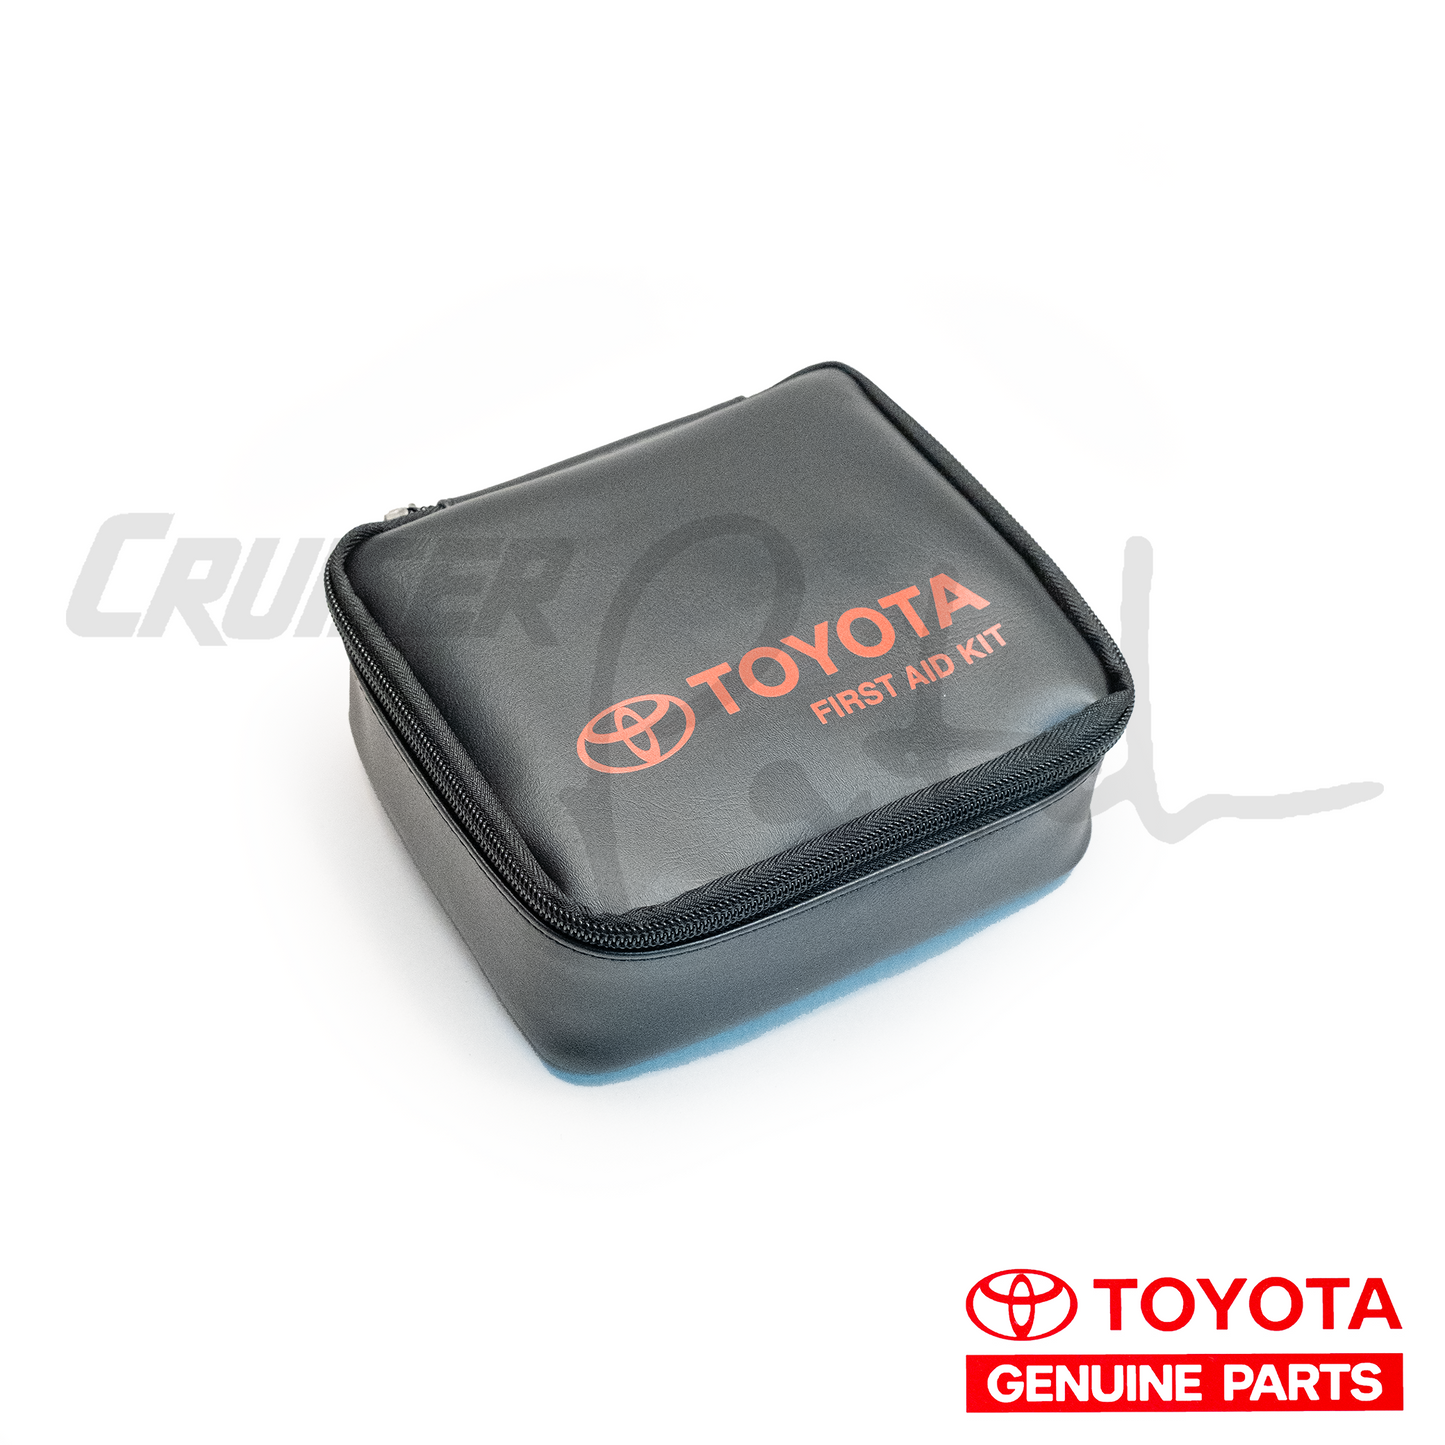 Toyota and Lexus First-Aid kits PT420